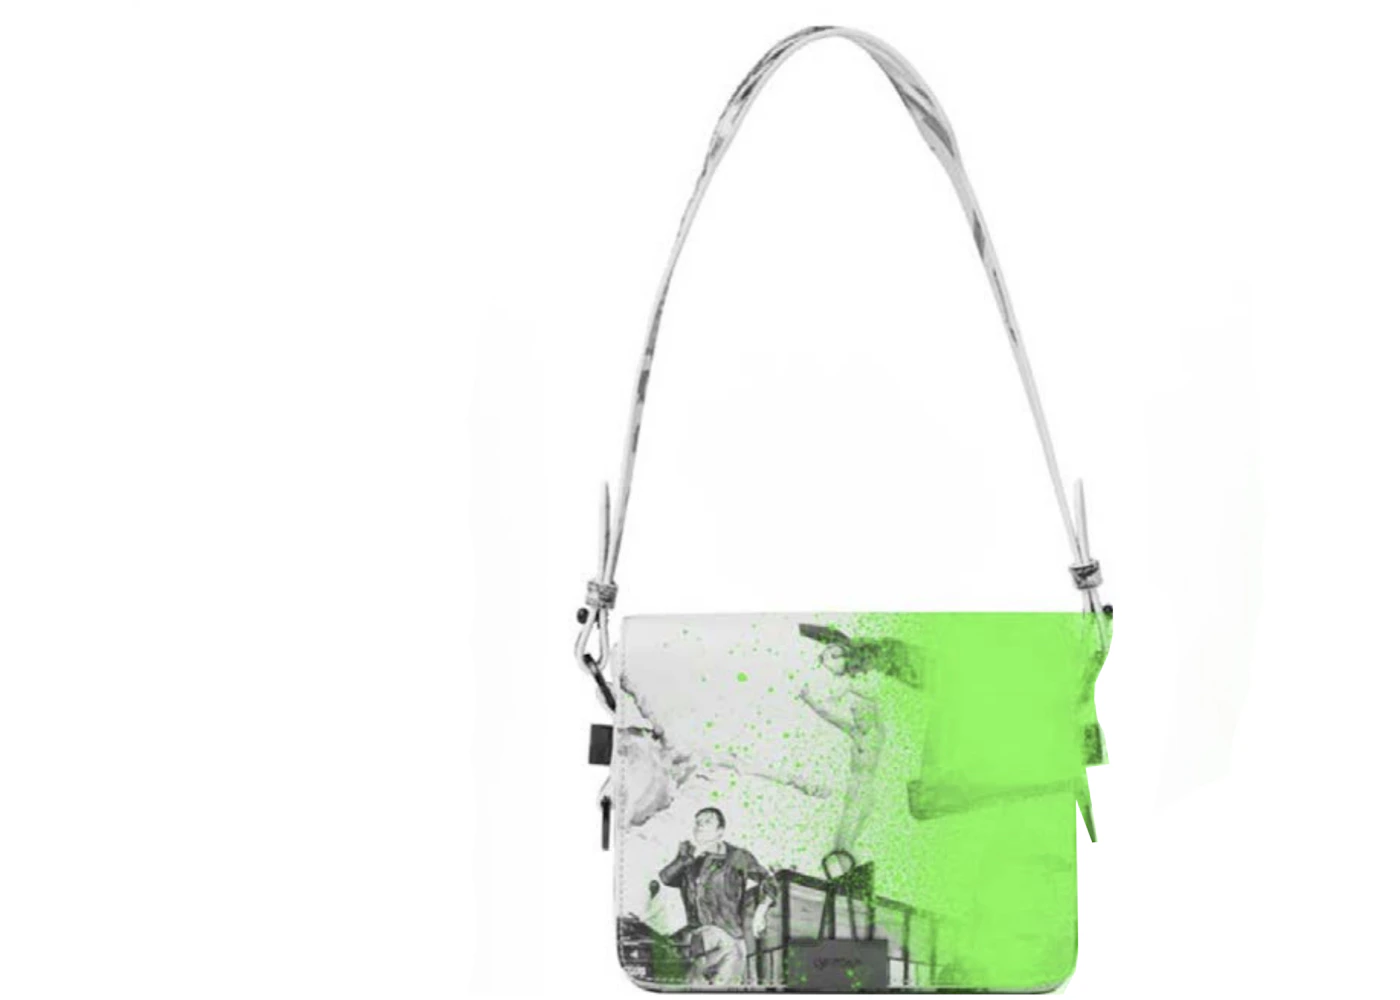 OFF-WHITE Virgil Abloh ICA Flap Bag 04 White/Green in Leather - US